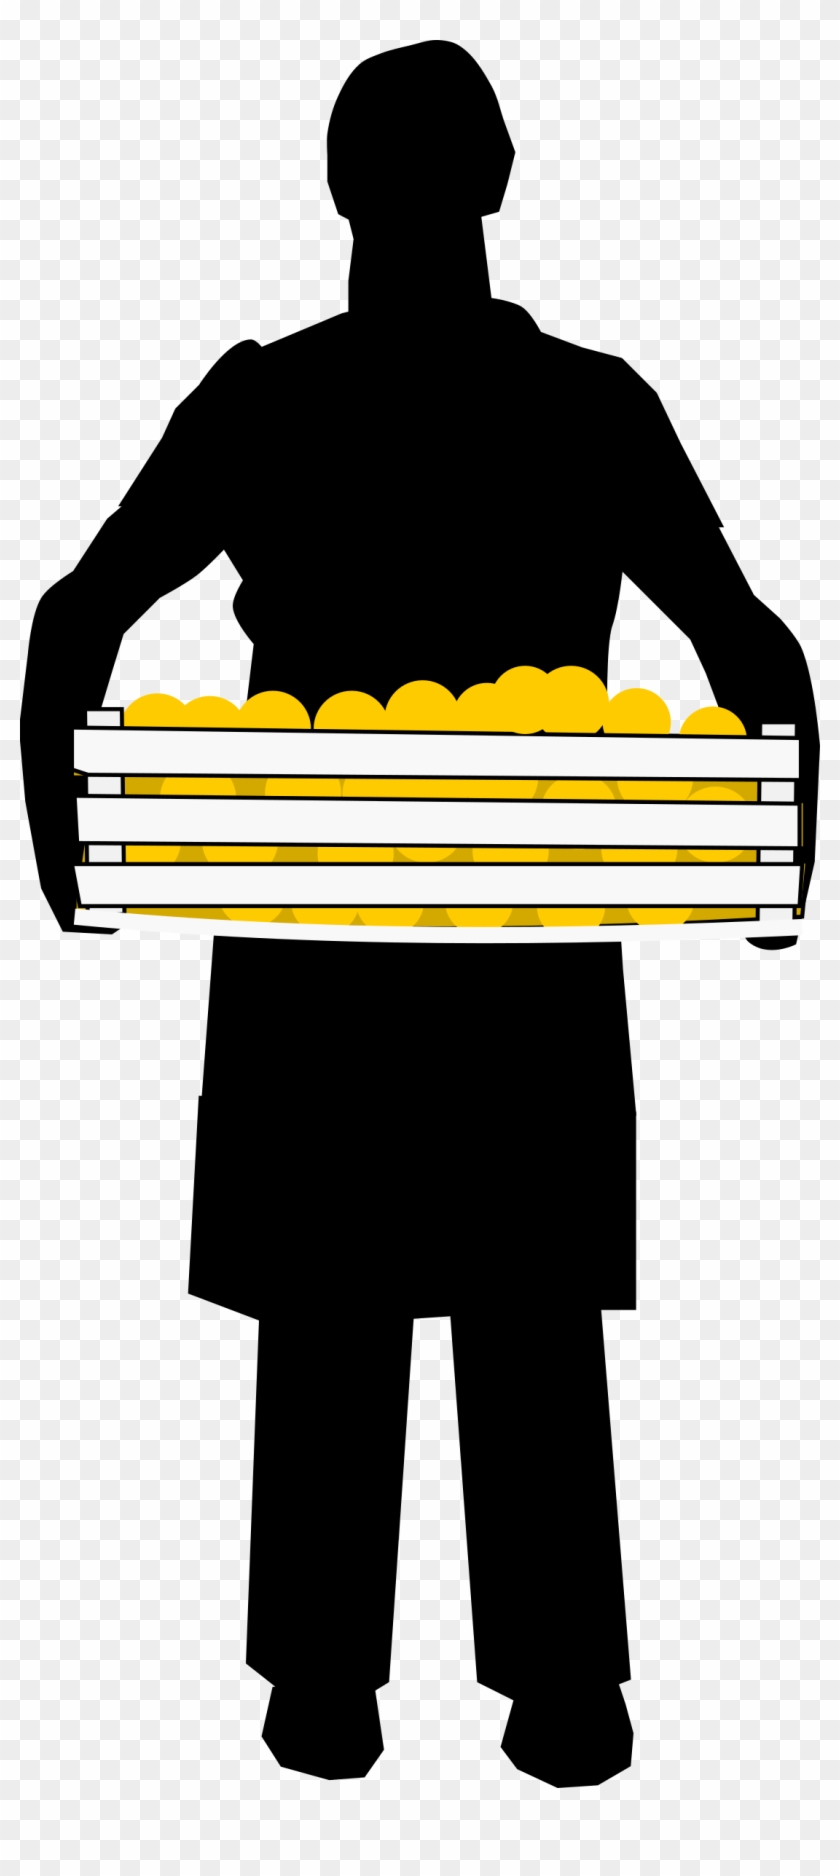 Grocery Store Silhouette Clip Art - Grocery Store Silhouette Clip Art #206665